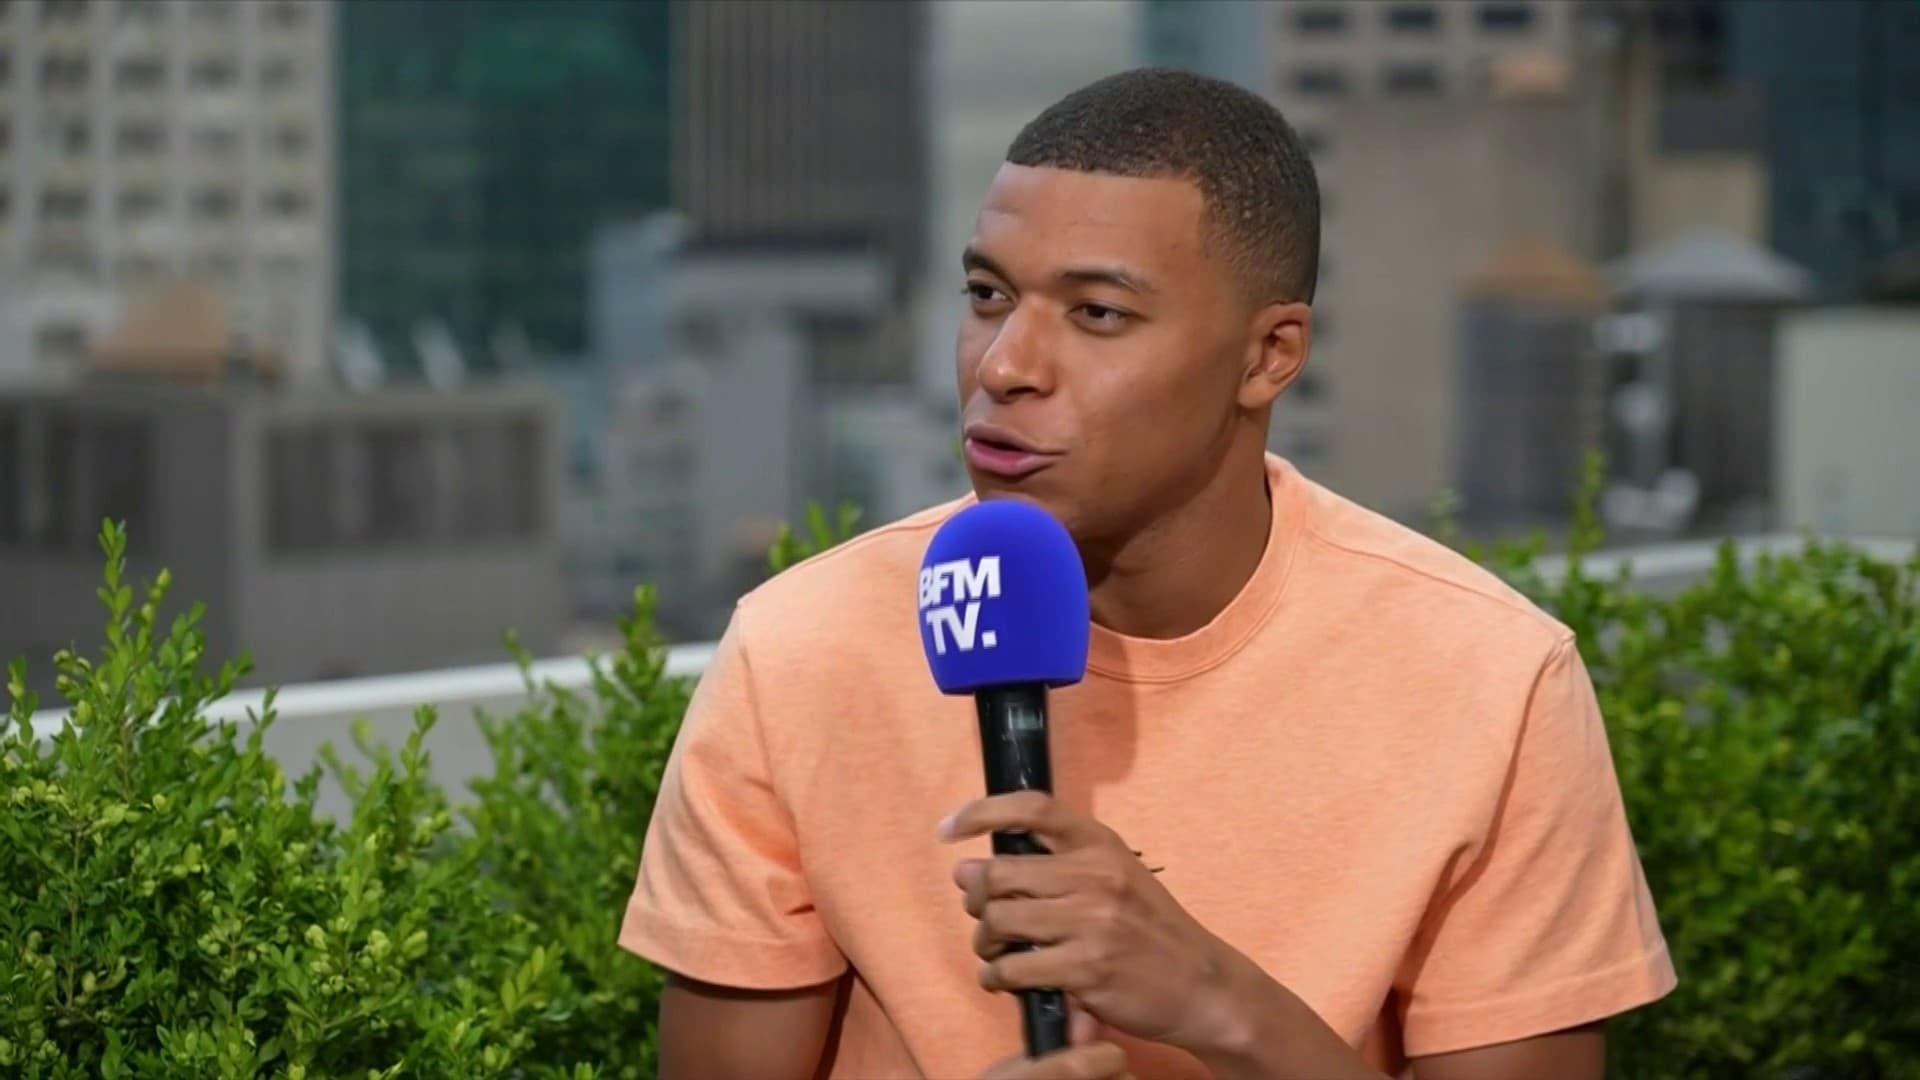 Kylian Mbappe accorde une interview a BFMTV a New York Etats Unis diffusee le 24 juin 2022 1438396